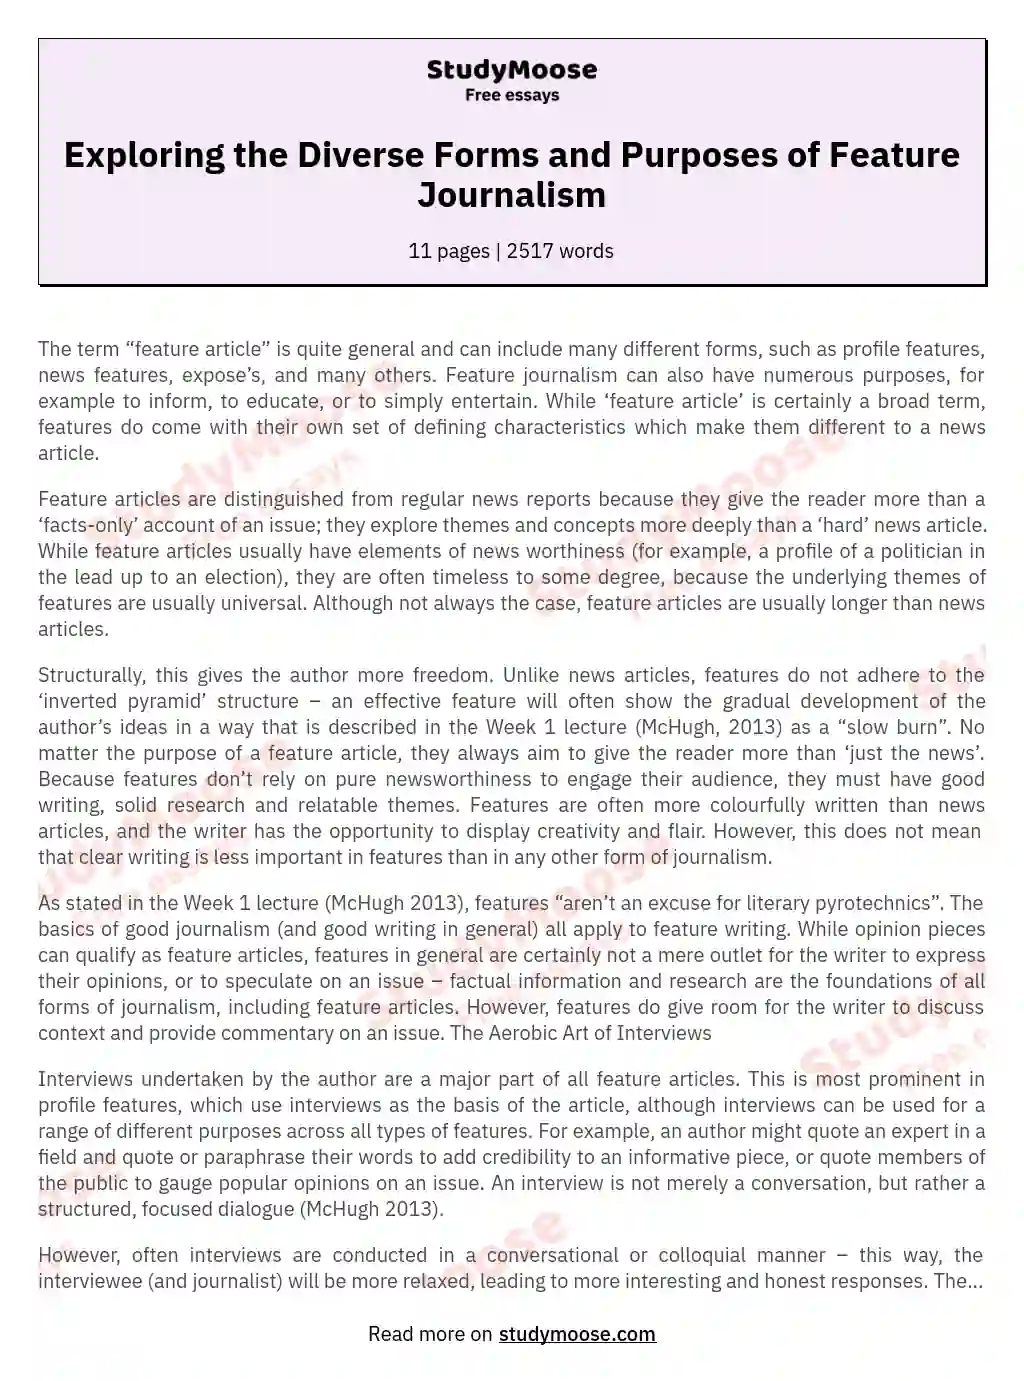 Exploring the Diverse Forms and Purposes of Feature Journalism essay